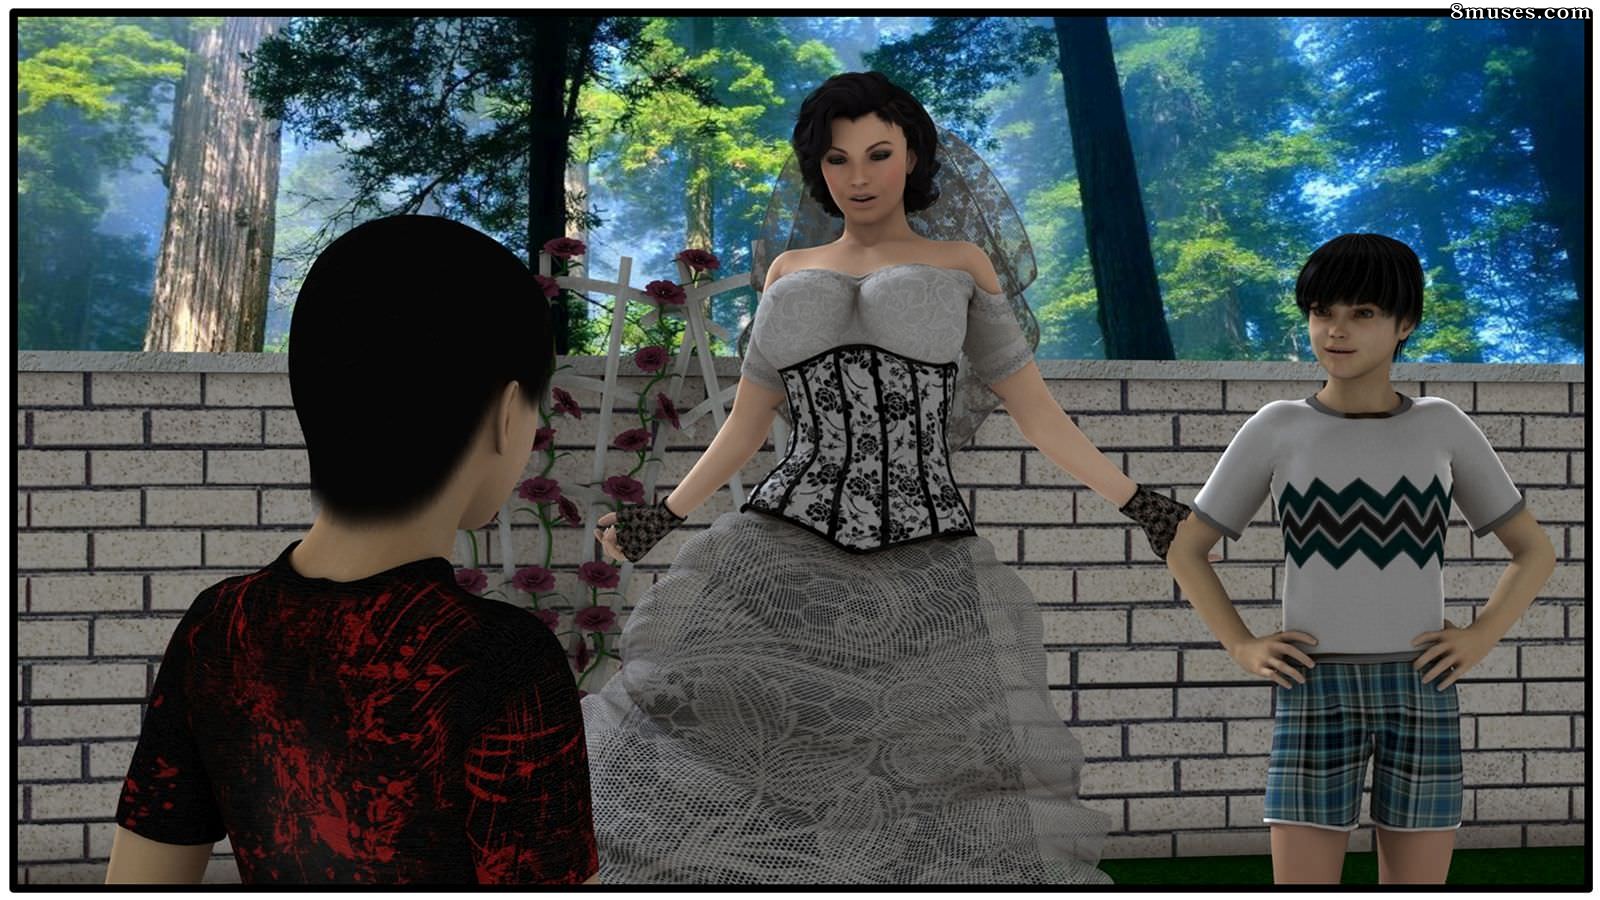 3d комиксы сын. The Conflict комикс часть 2. The Conflict комикс. Комикс - ma boy (your son is my husband. The Conflict 1 комикс.